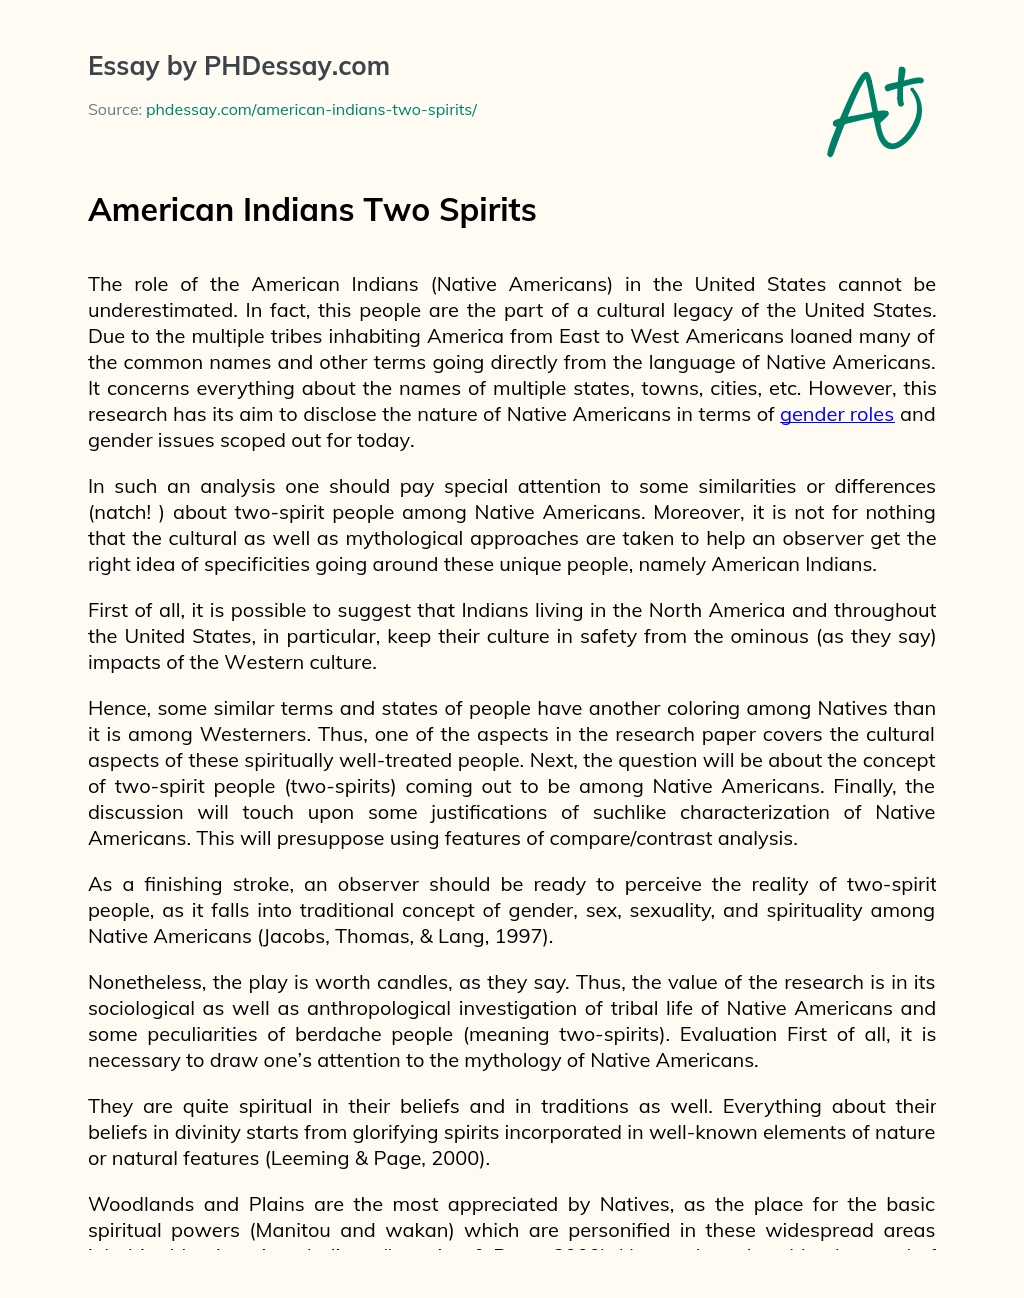 American Indians Two Spirits essay